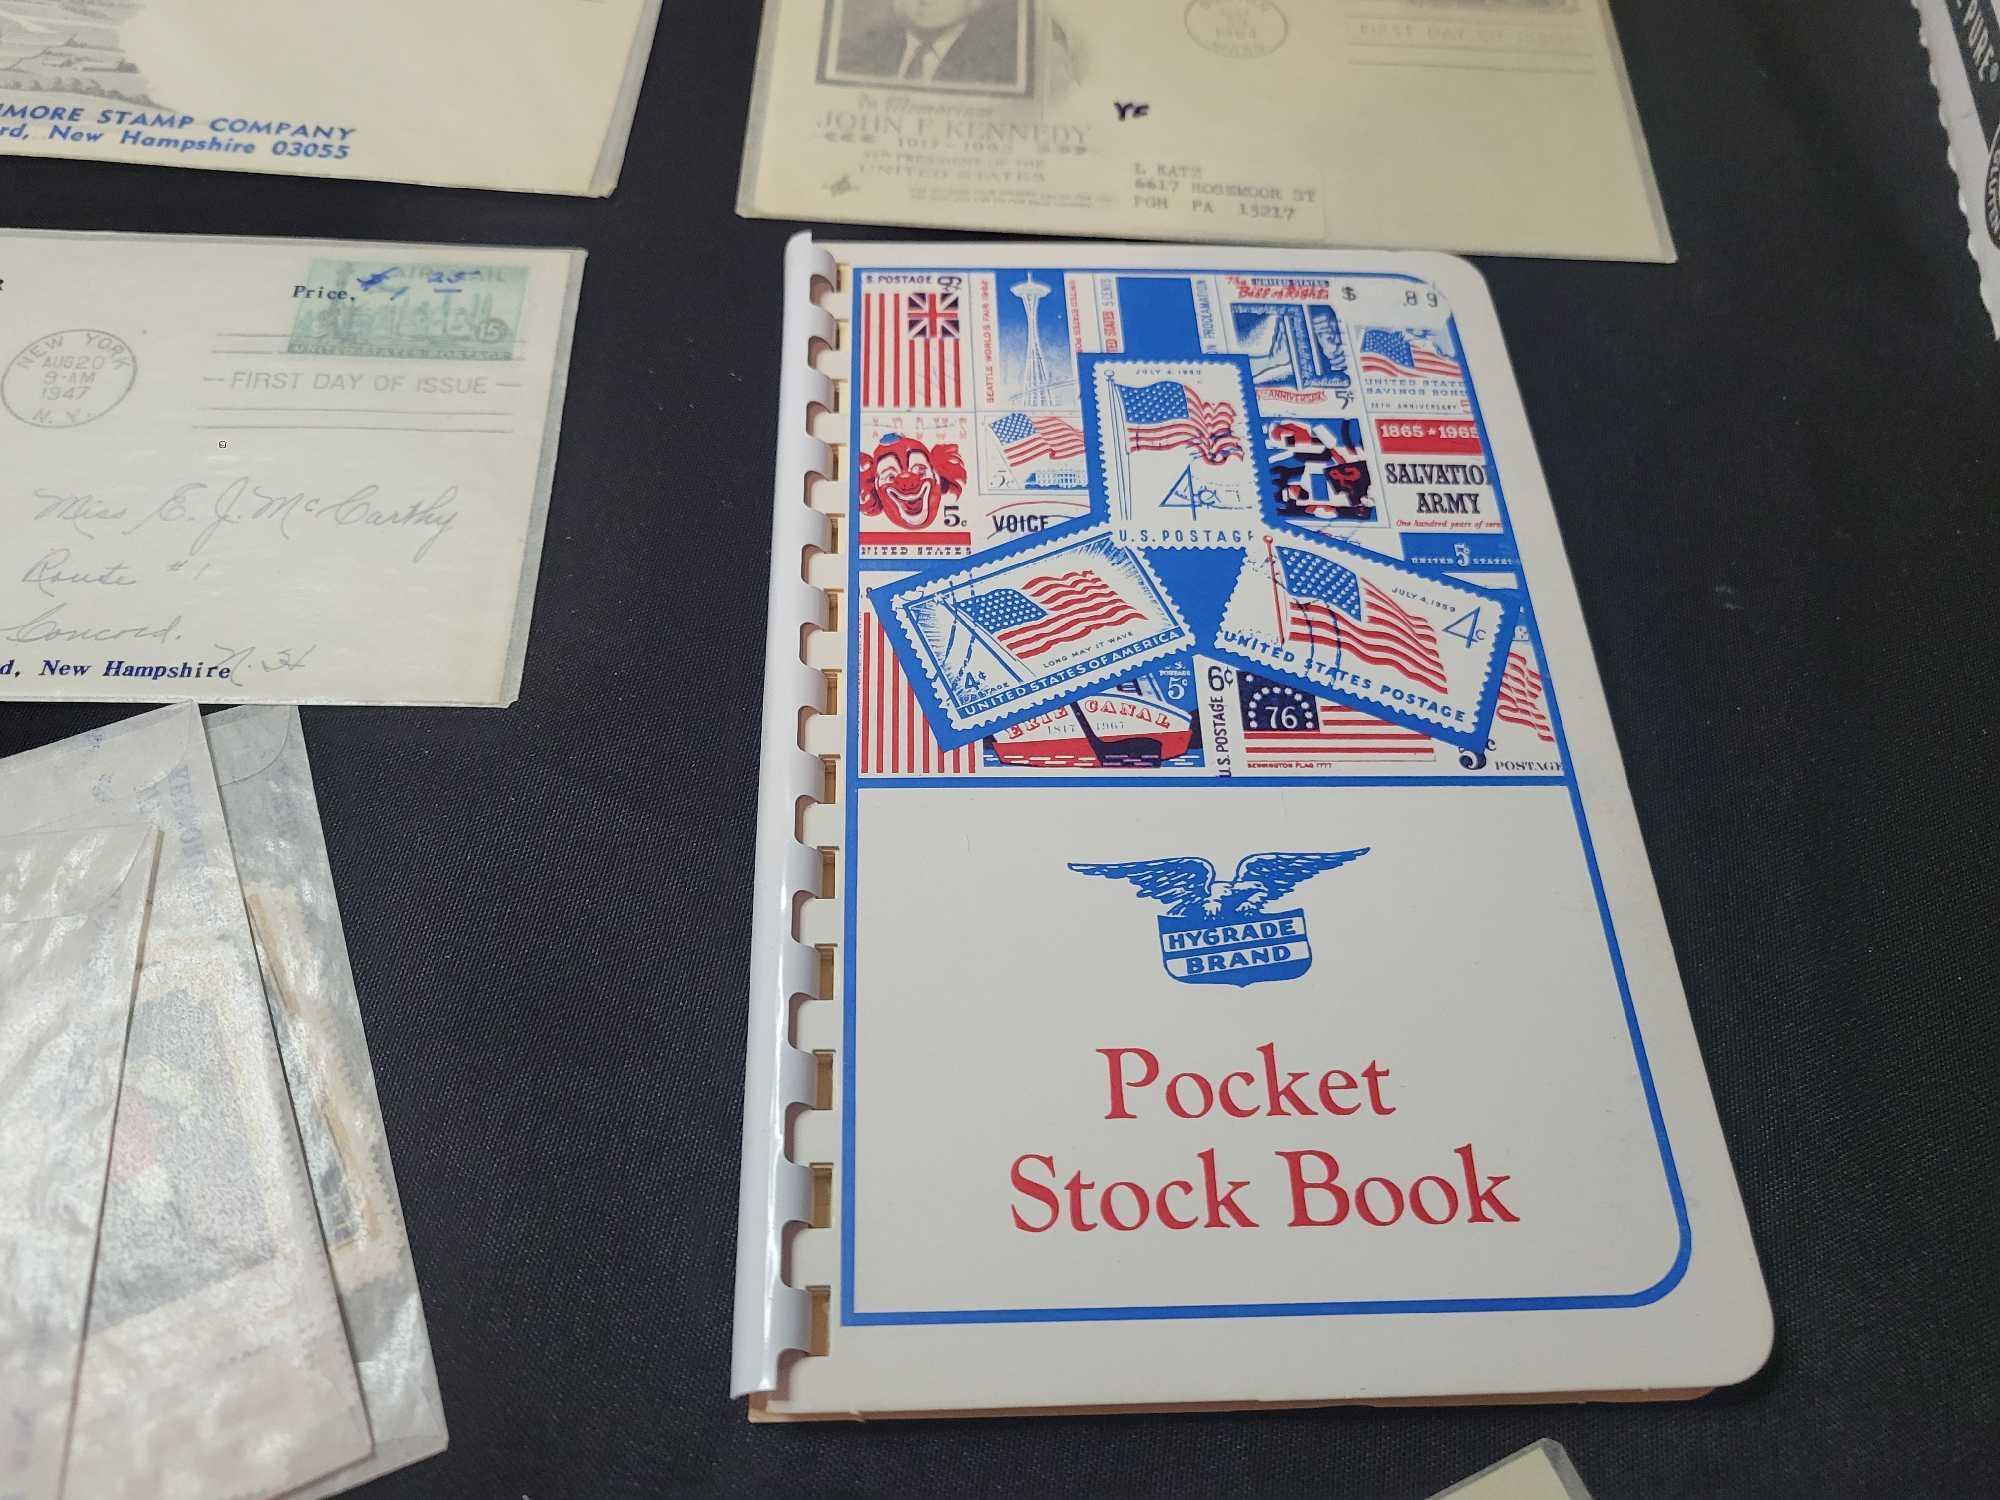 Assorted USPS mint stamps from heritage stamp co., some first day covers,